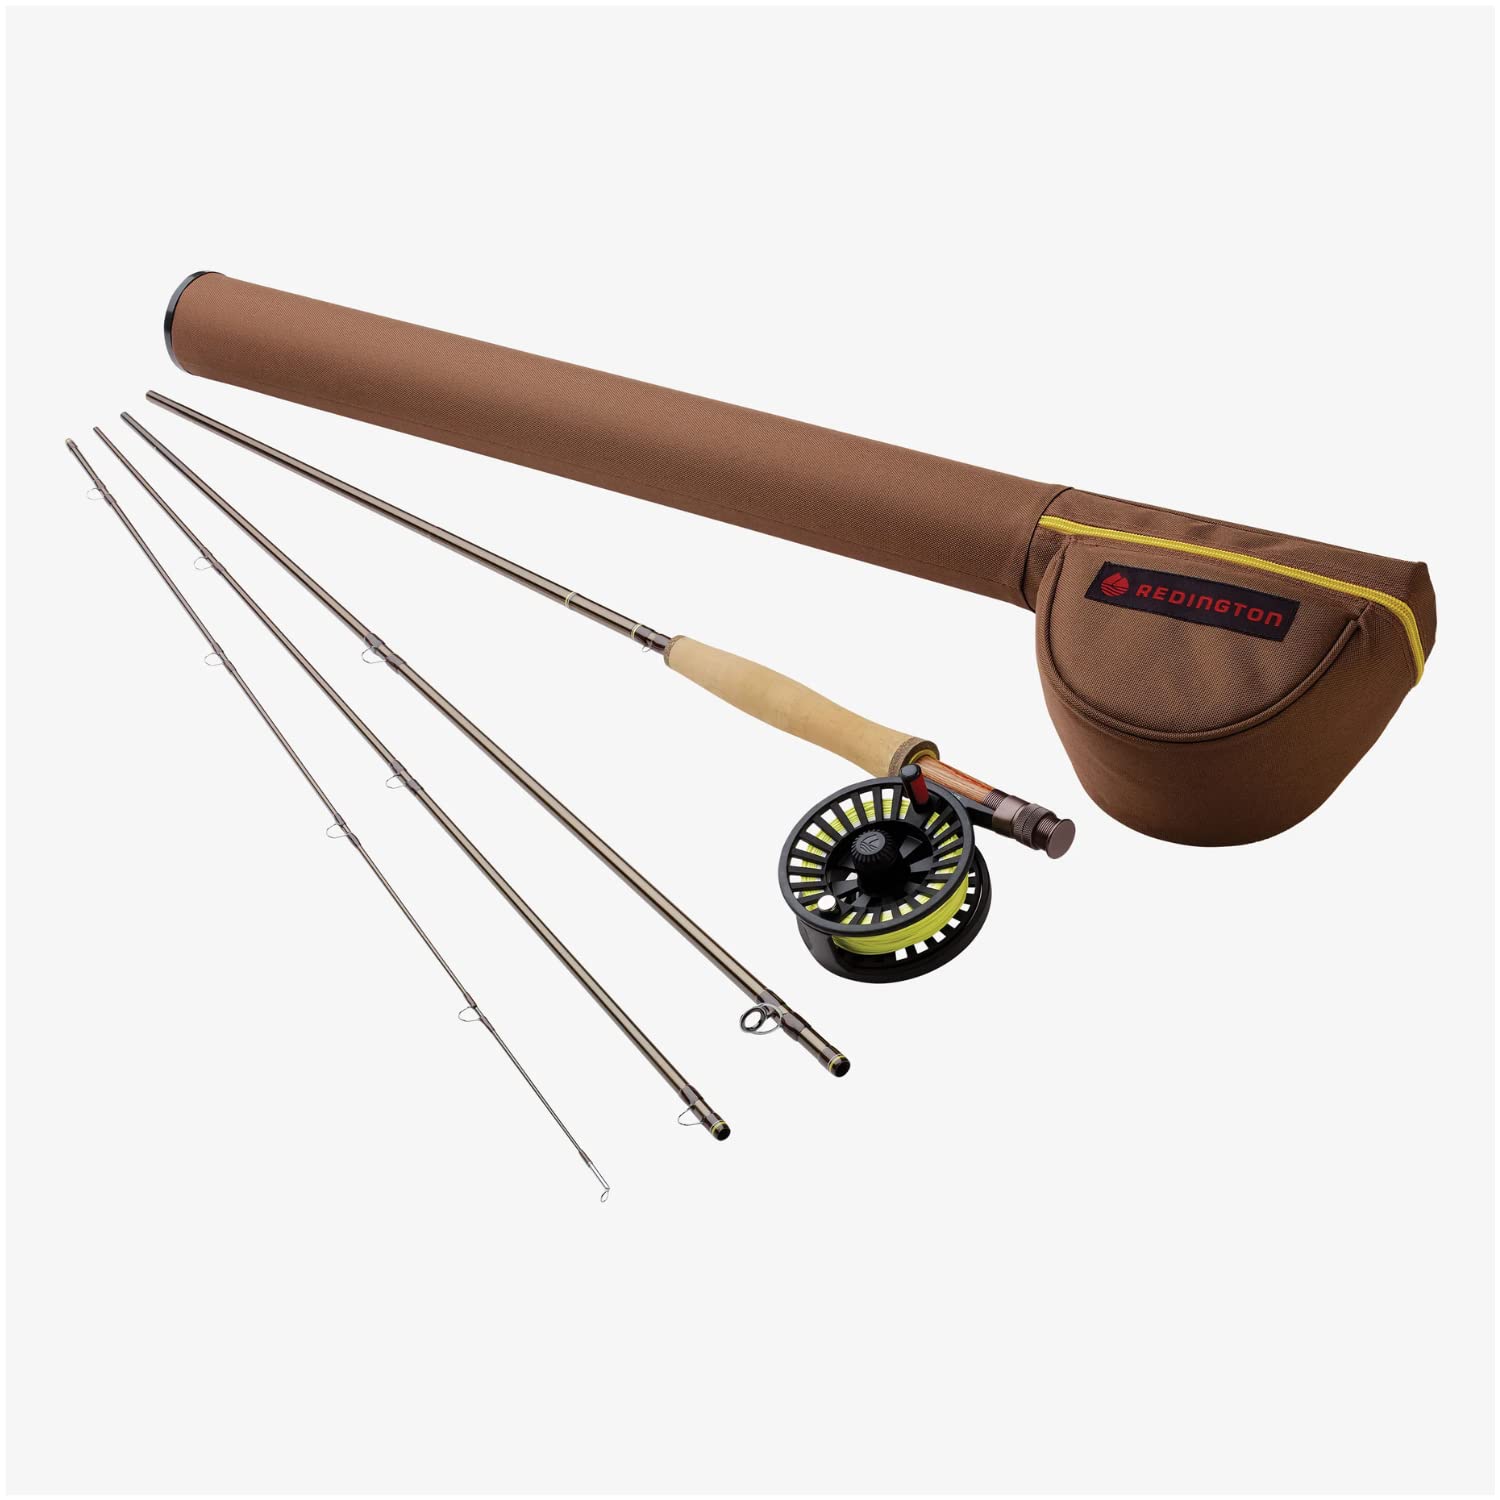 Redington Path Fly Rod Combo Kit with Pre-Spooled Crosswater Reel, Medium- Fast Action Rod 890-4